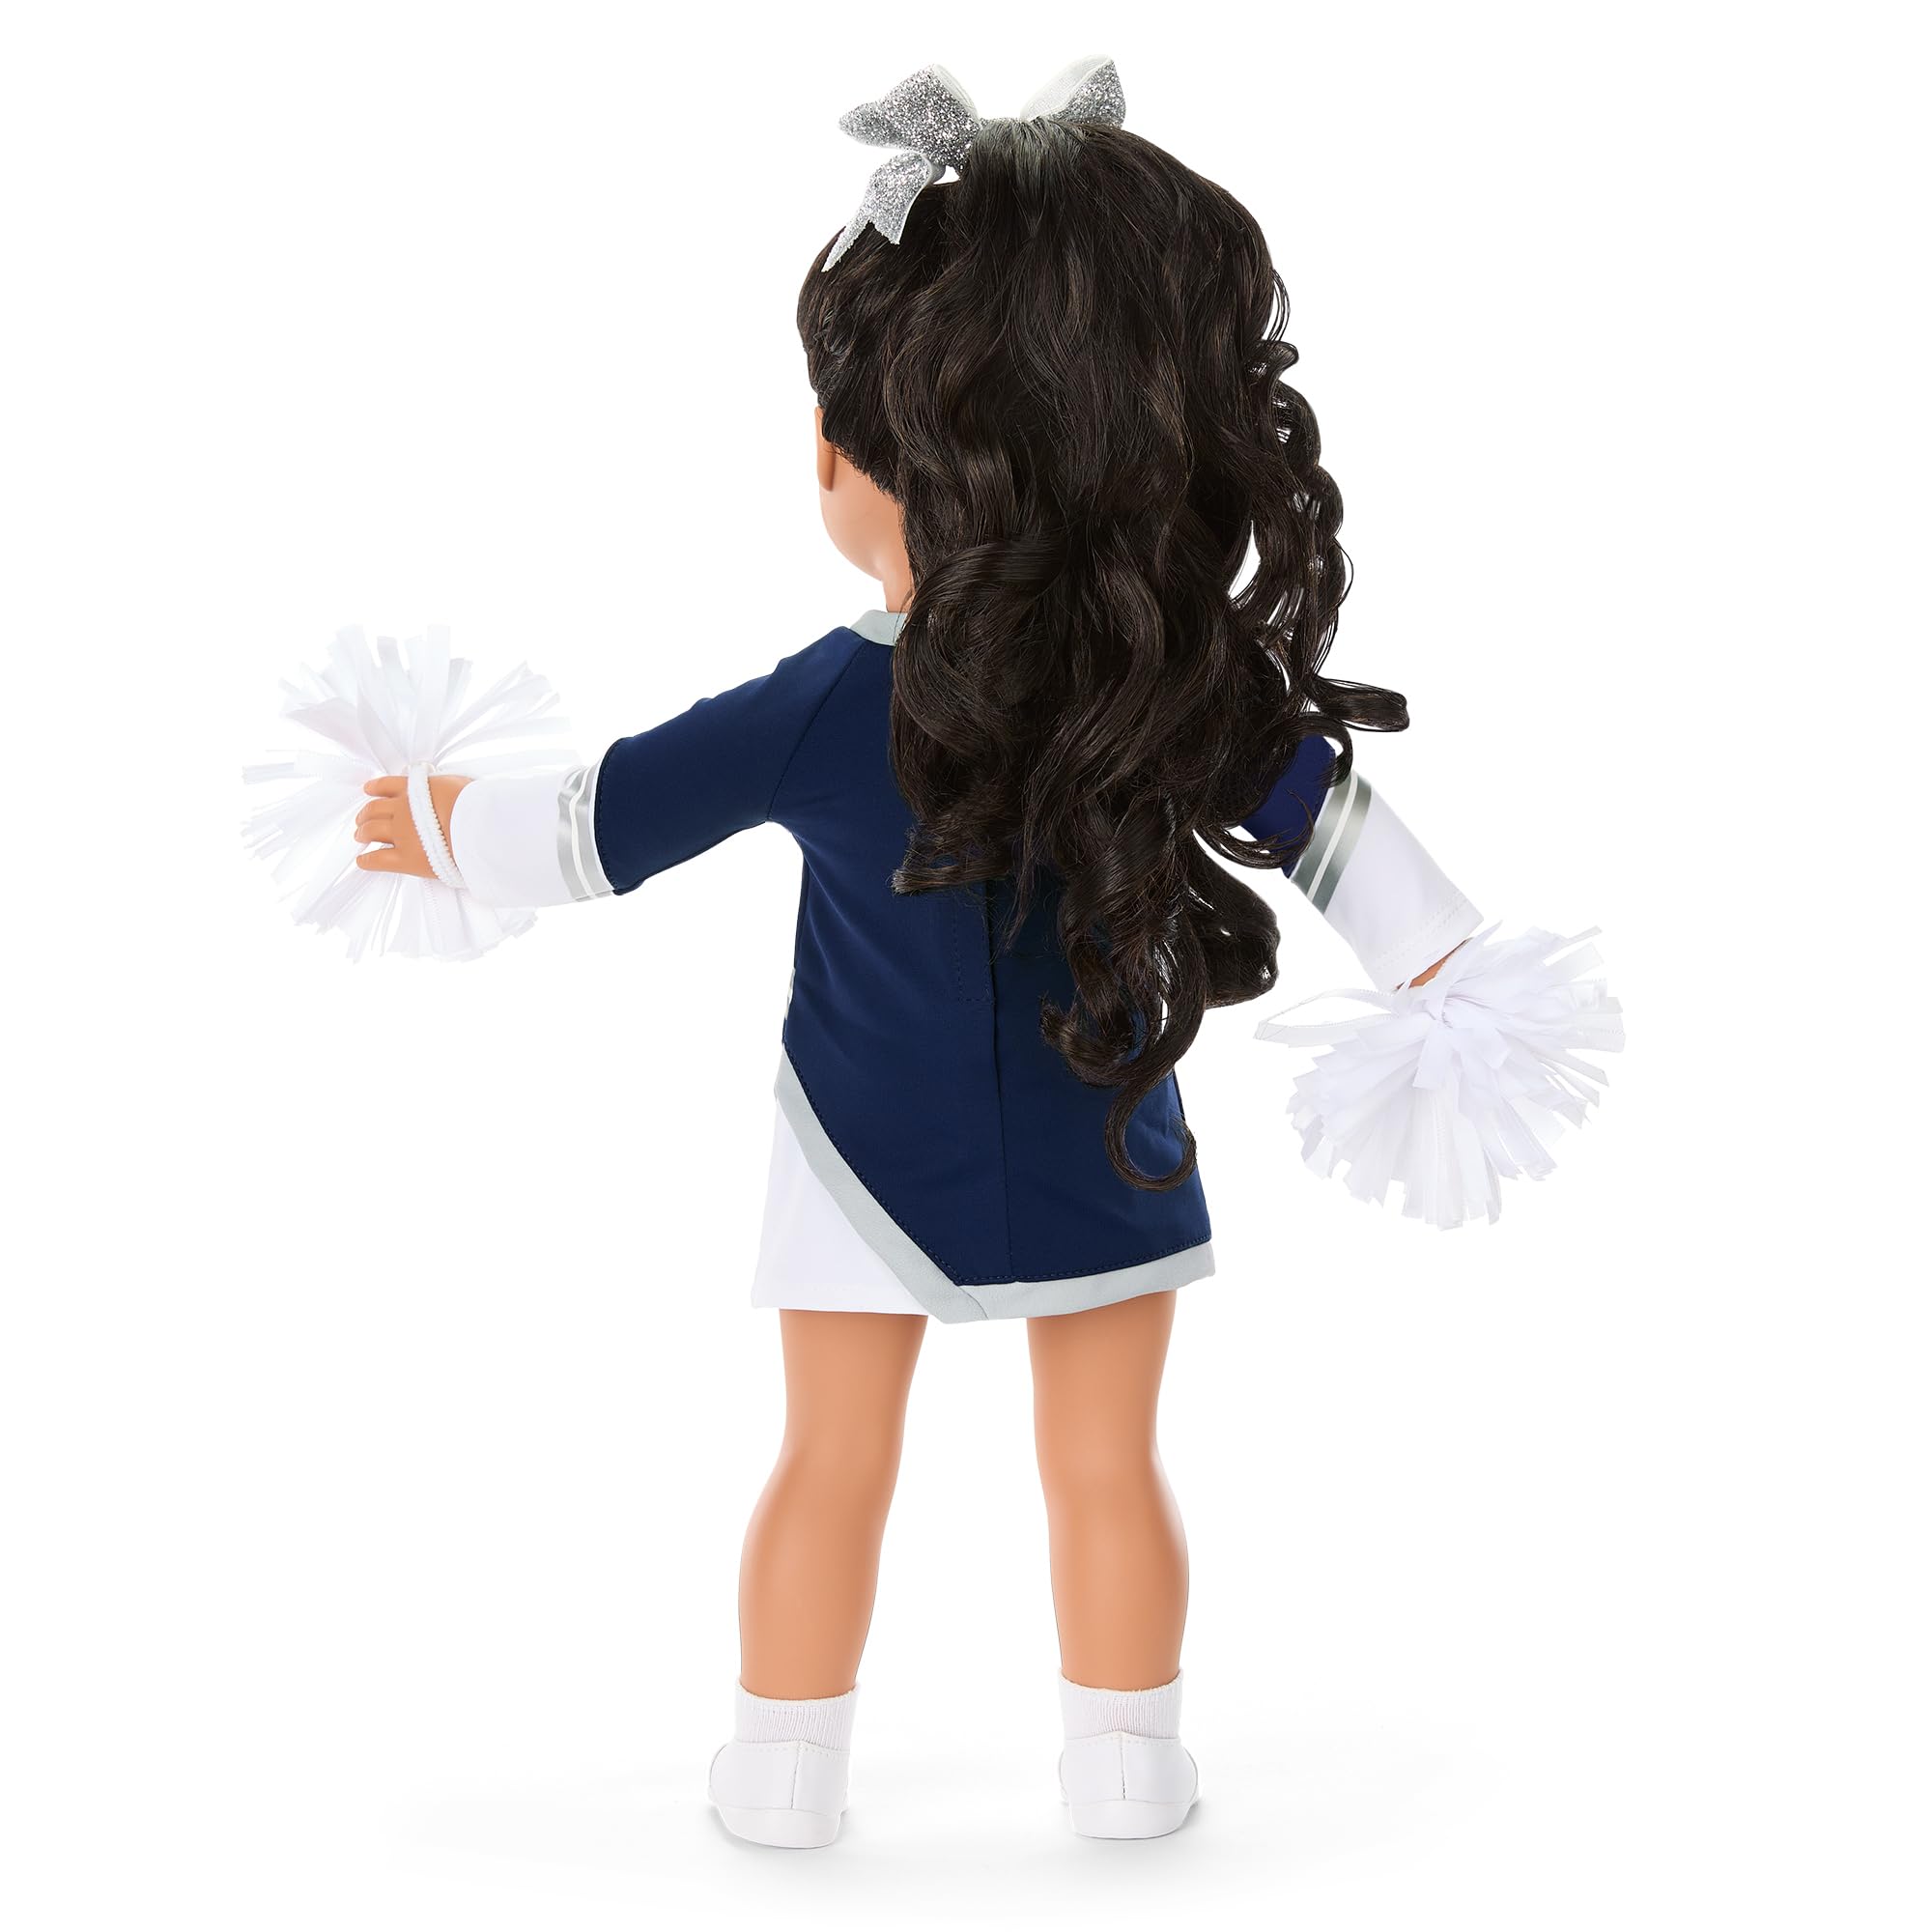 American Girl Dallas Cowboys Cheer Uniform 18 inch Doll Clothes with Pom Poms, Blue and Grey, 5 pcs, Ages 6+